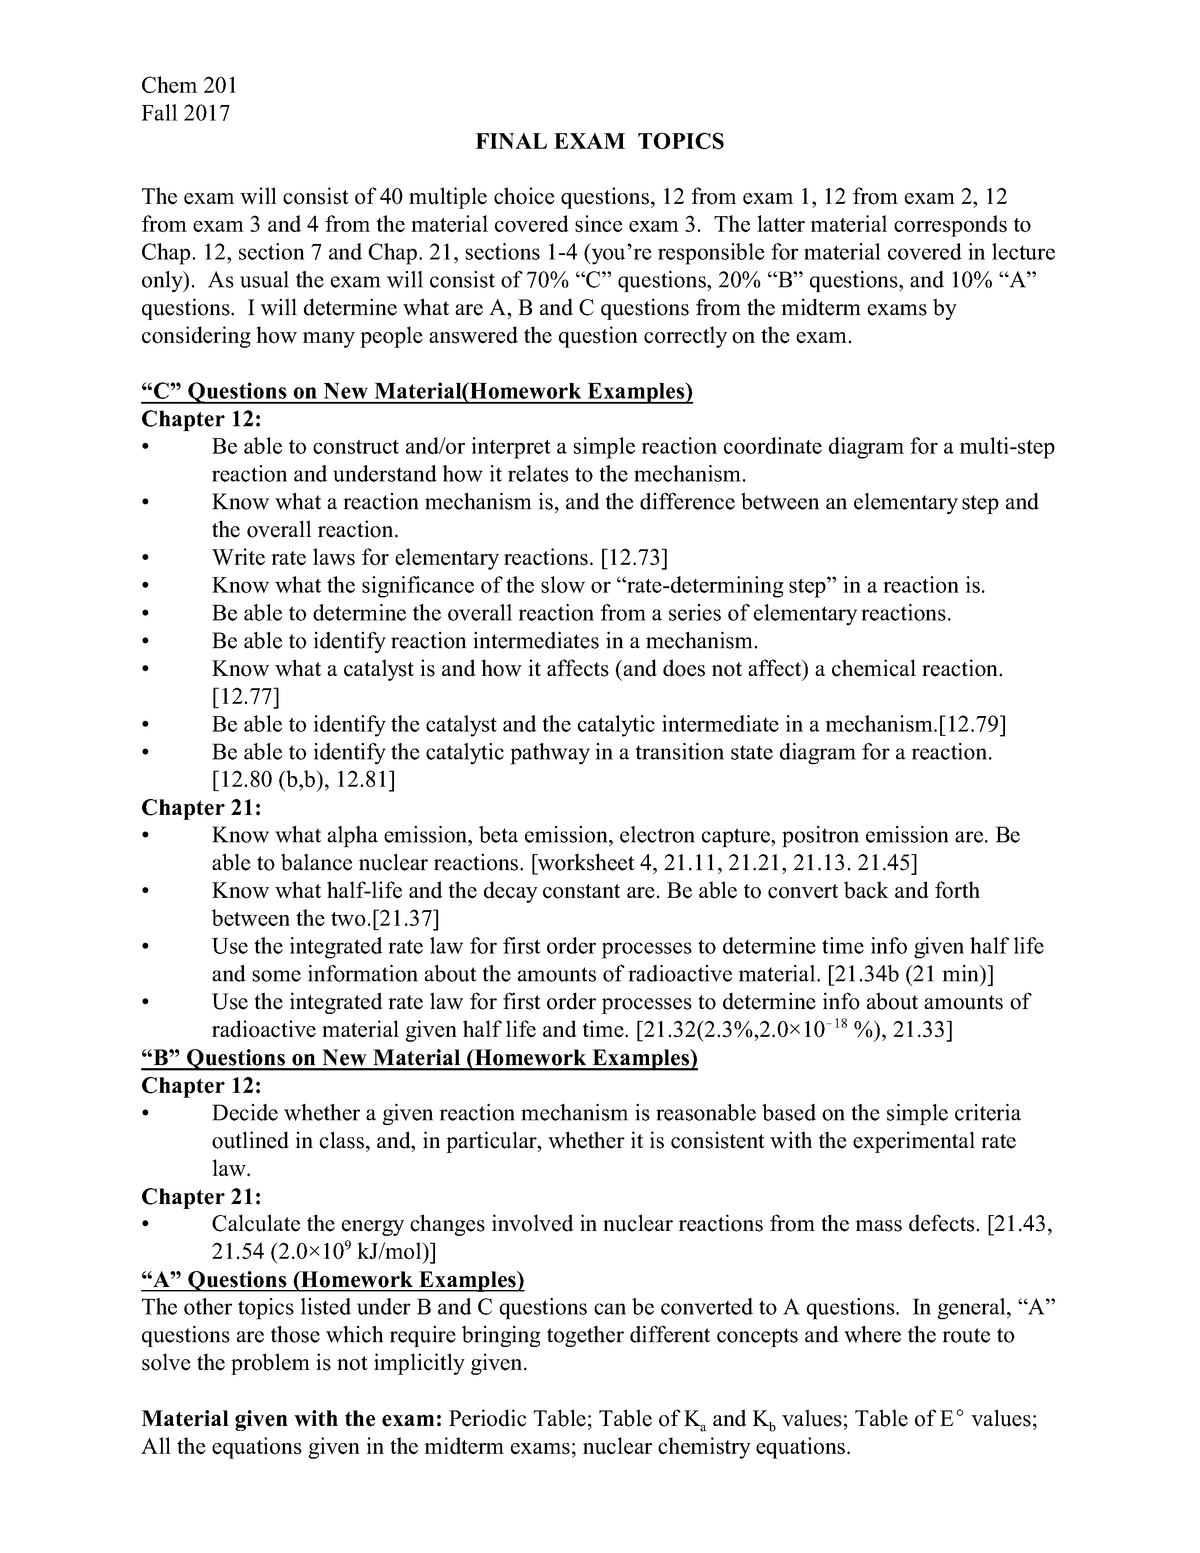 Chem201 Final Study Guide Chem 201 Fall 2017 Final Exam Topics The Exam Will Consist Of 40 Multiple Choice Questions 12 From Exam 12 From Exam 12 From Exam And Studocu